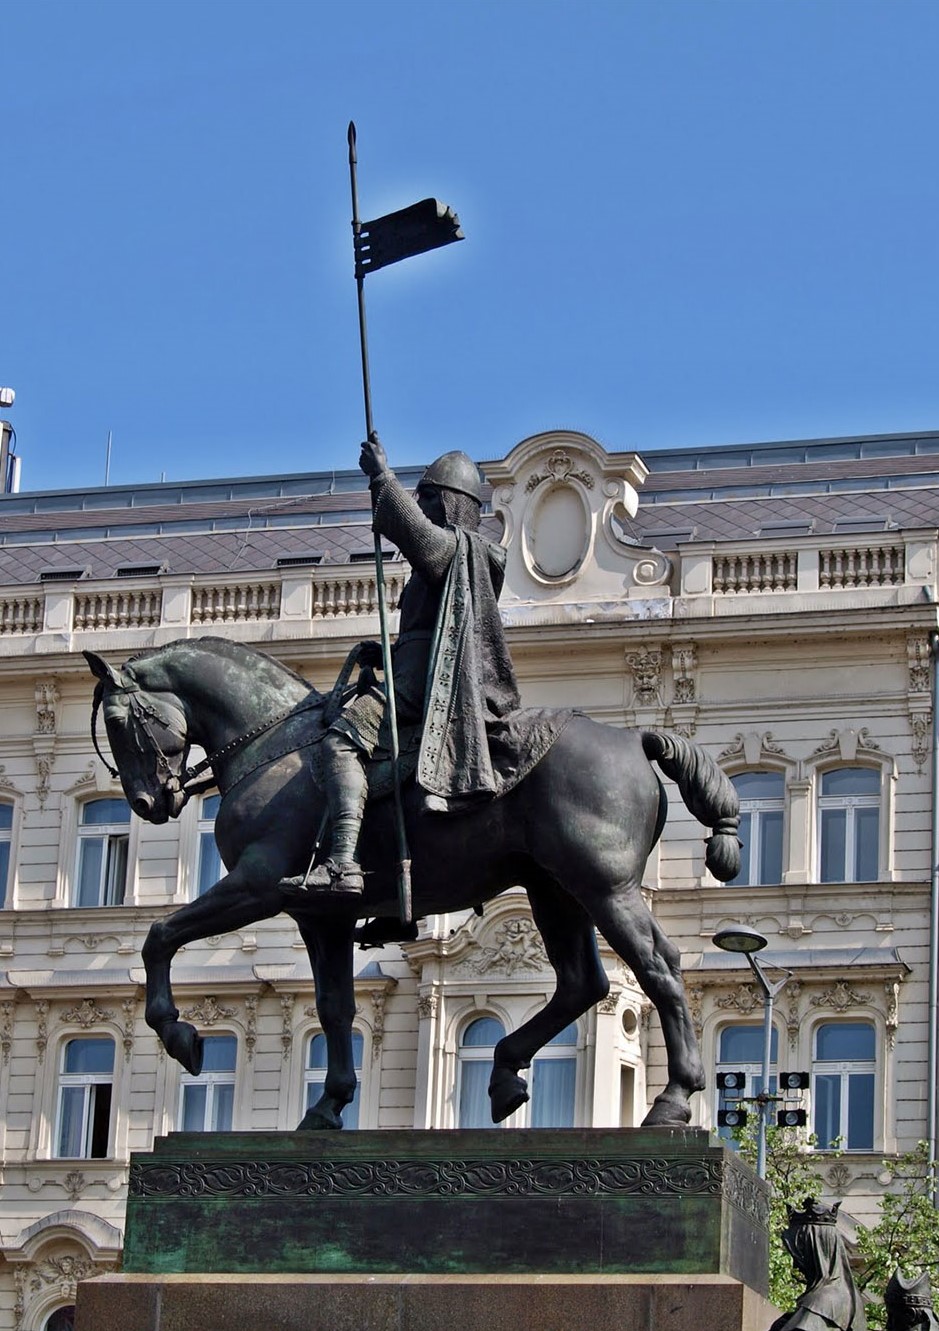 Wenceslas Monument is a statue of Vaclav sitting on a horse